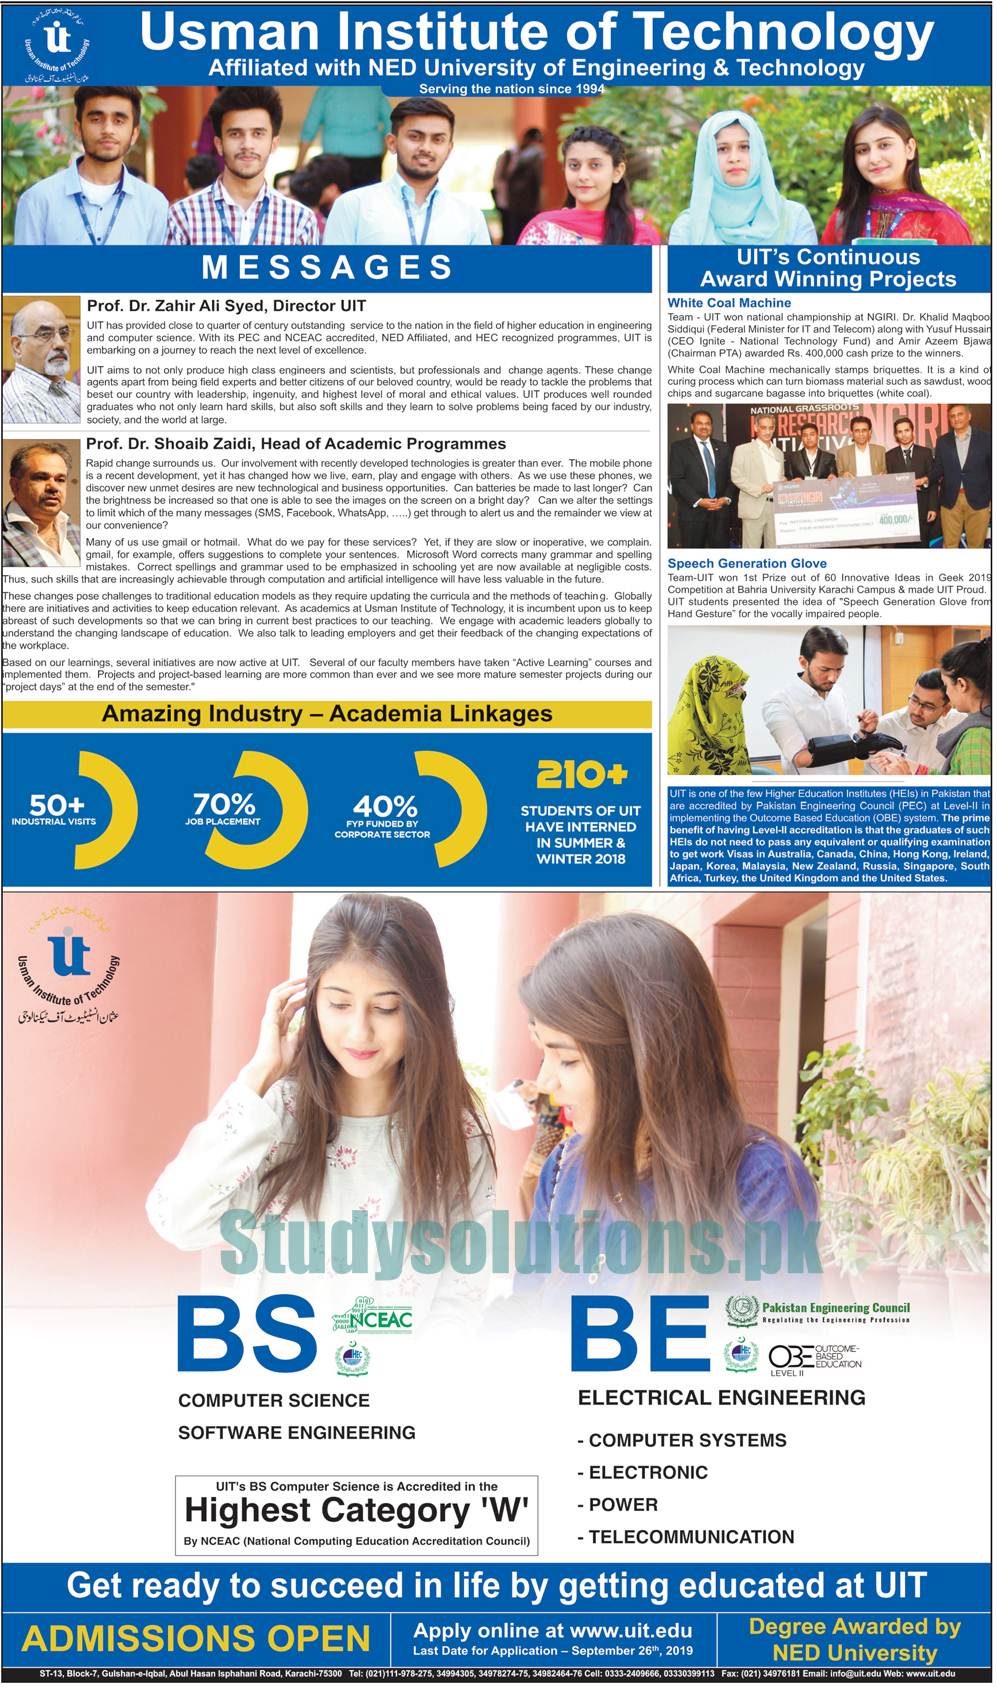 Usman Institute Of Technology Karachi BS & BE Admission 